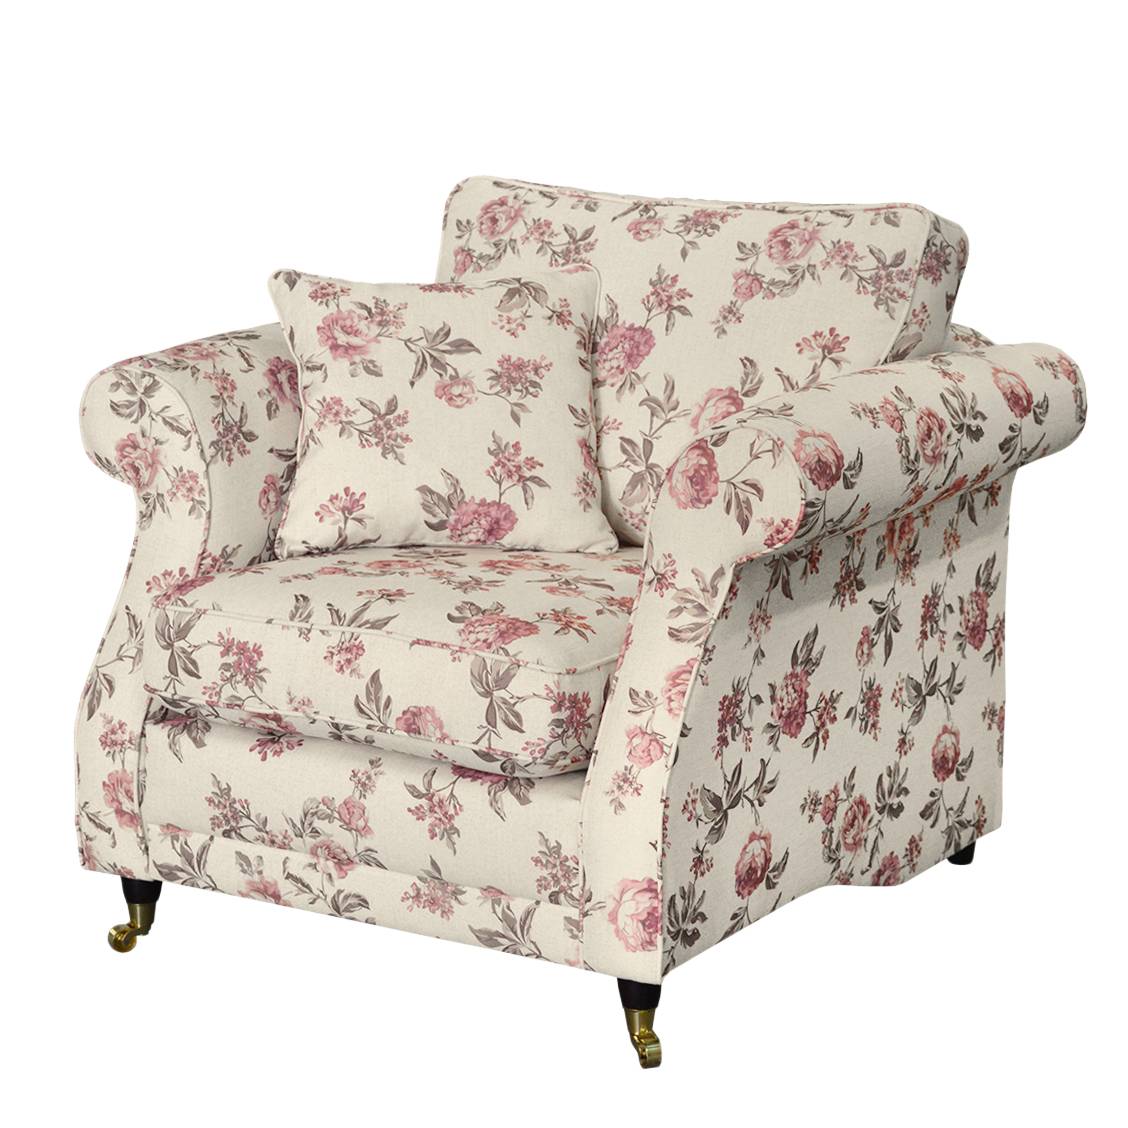 home24 Maison Belfort Sessel Rosehearty Creme/Rose Webstoff 106x94x96 cm (BxHxT)